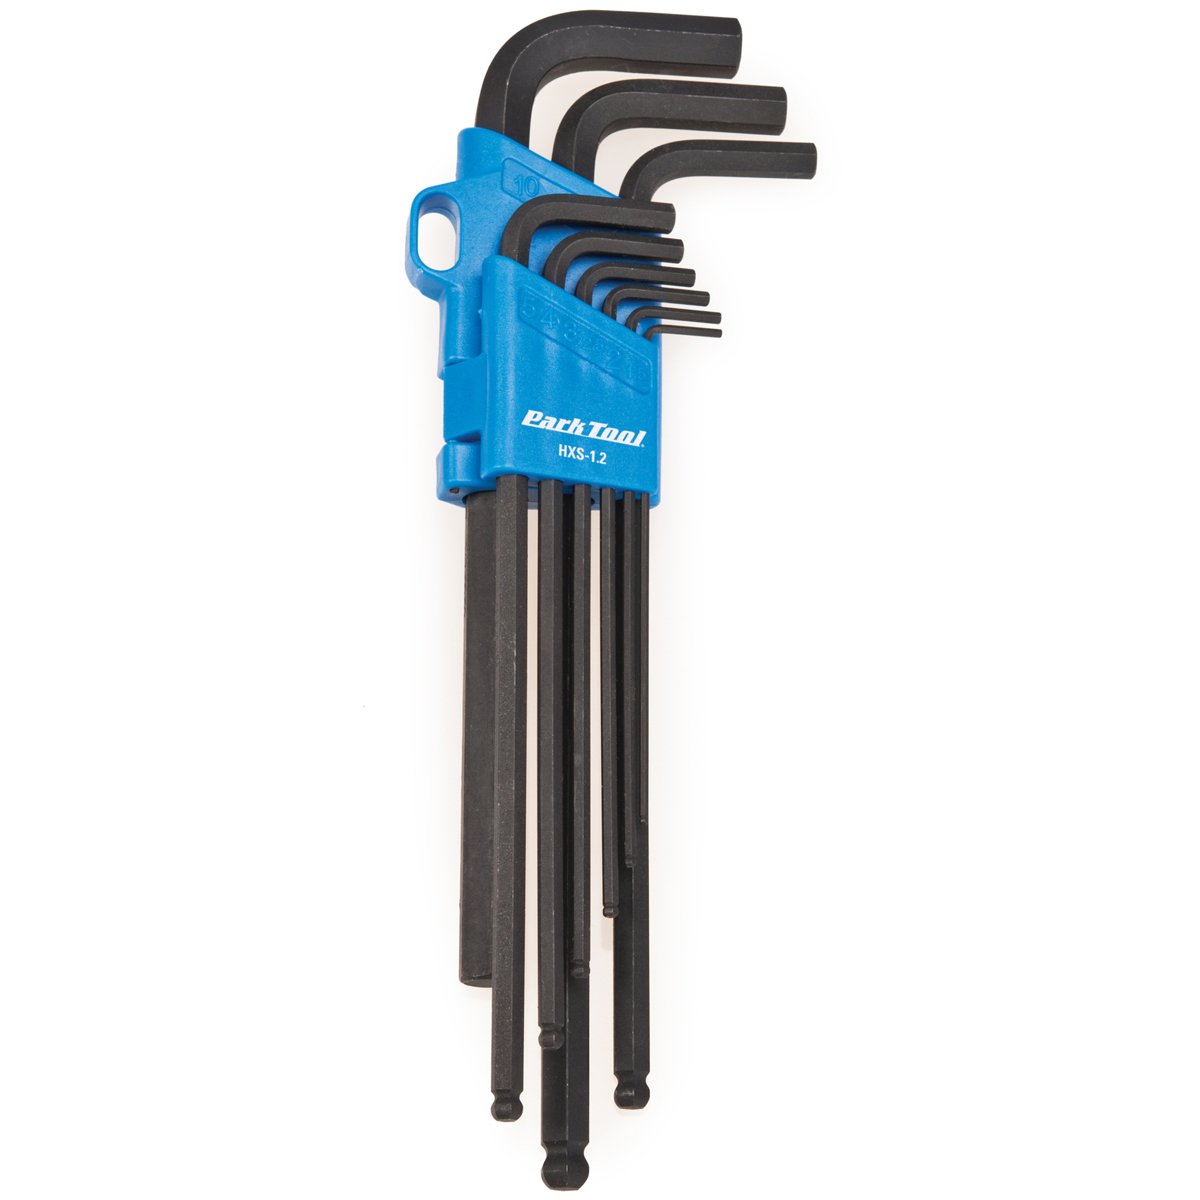 Park Tool Professional Hex Wrench Set | Sykkel